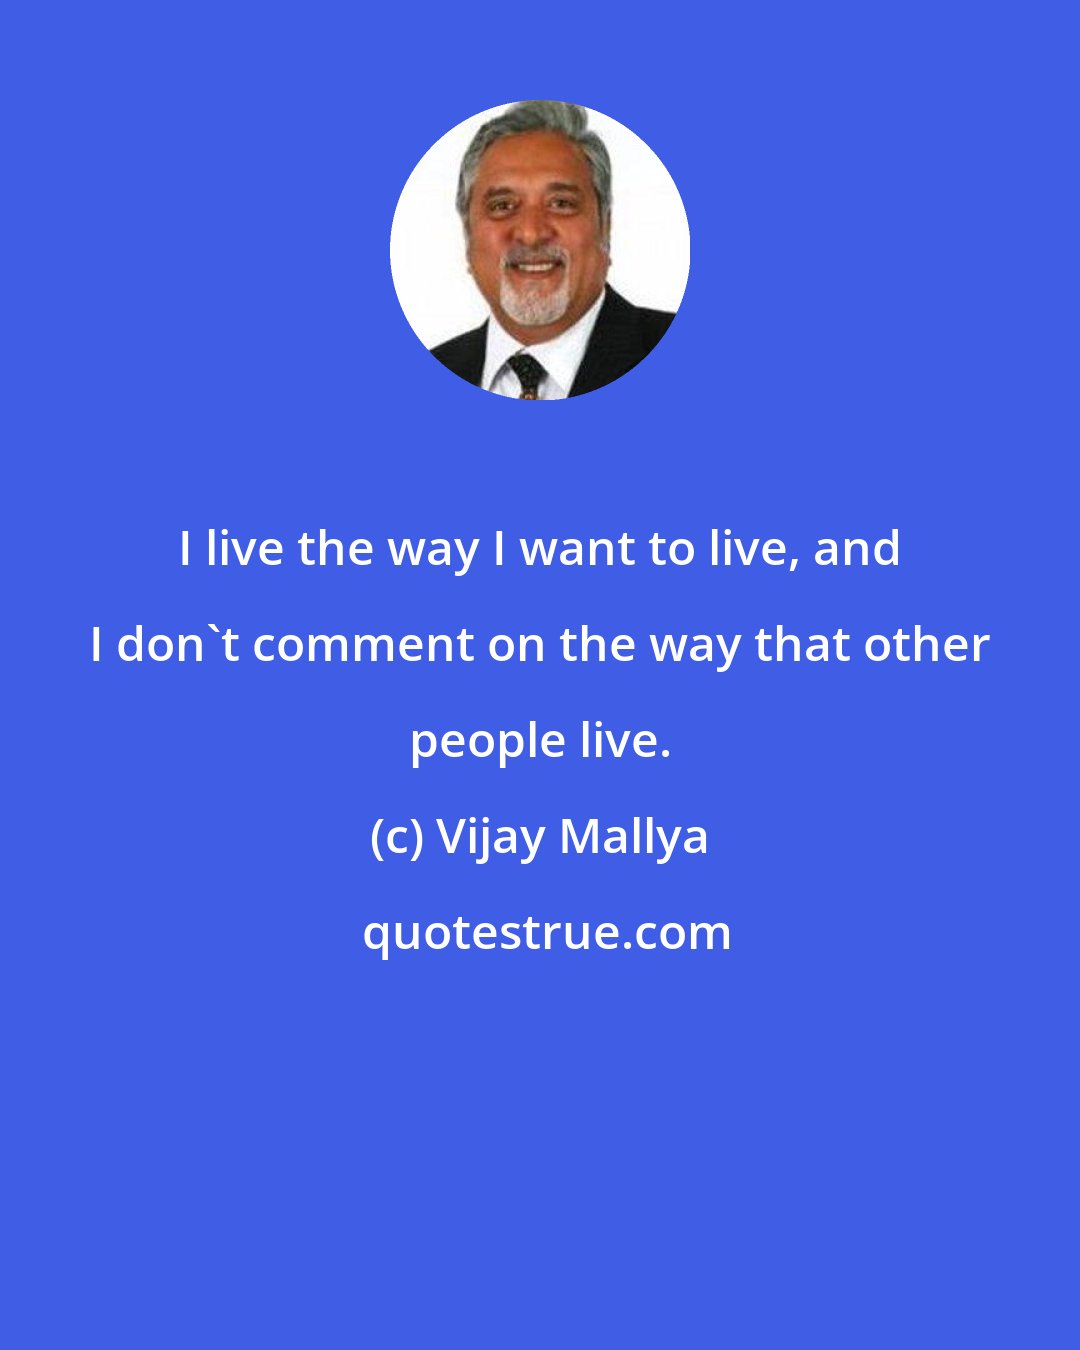 Vijay Mallya: I live the way I want to live, and I don't comment on the way that other people live.